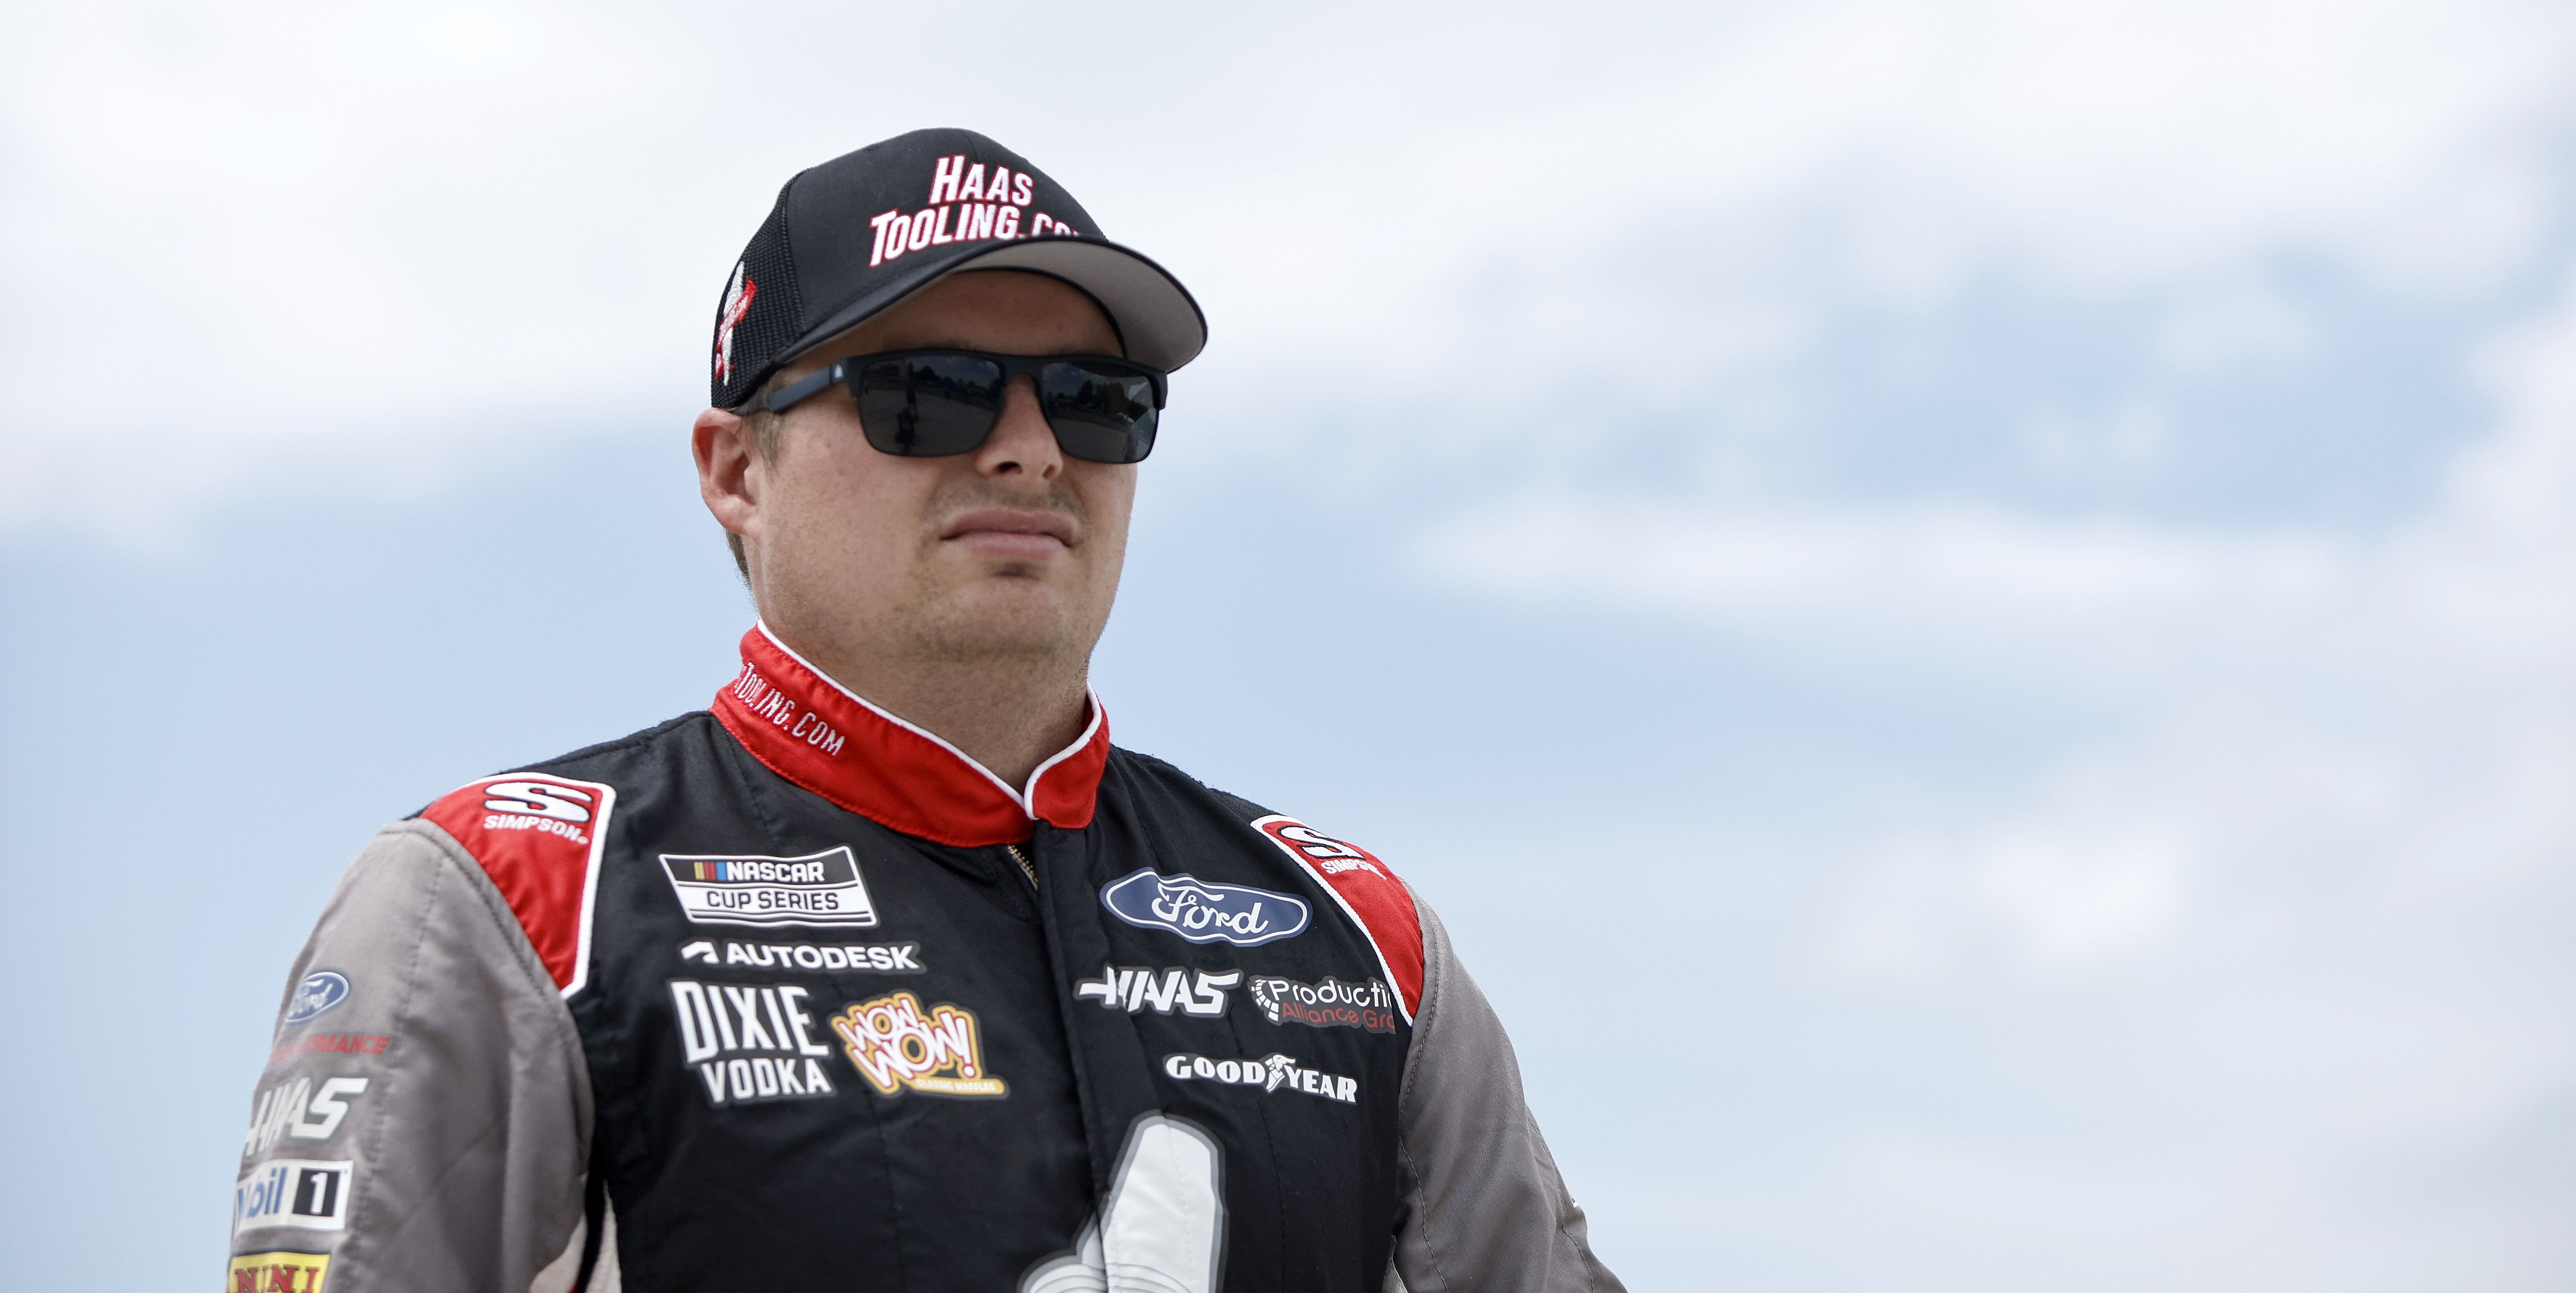 NASCAR Driver Cole Custer Fined $100,000, Crew Chief Suspended for Playoff Block